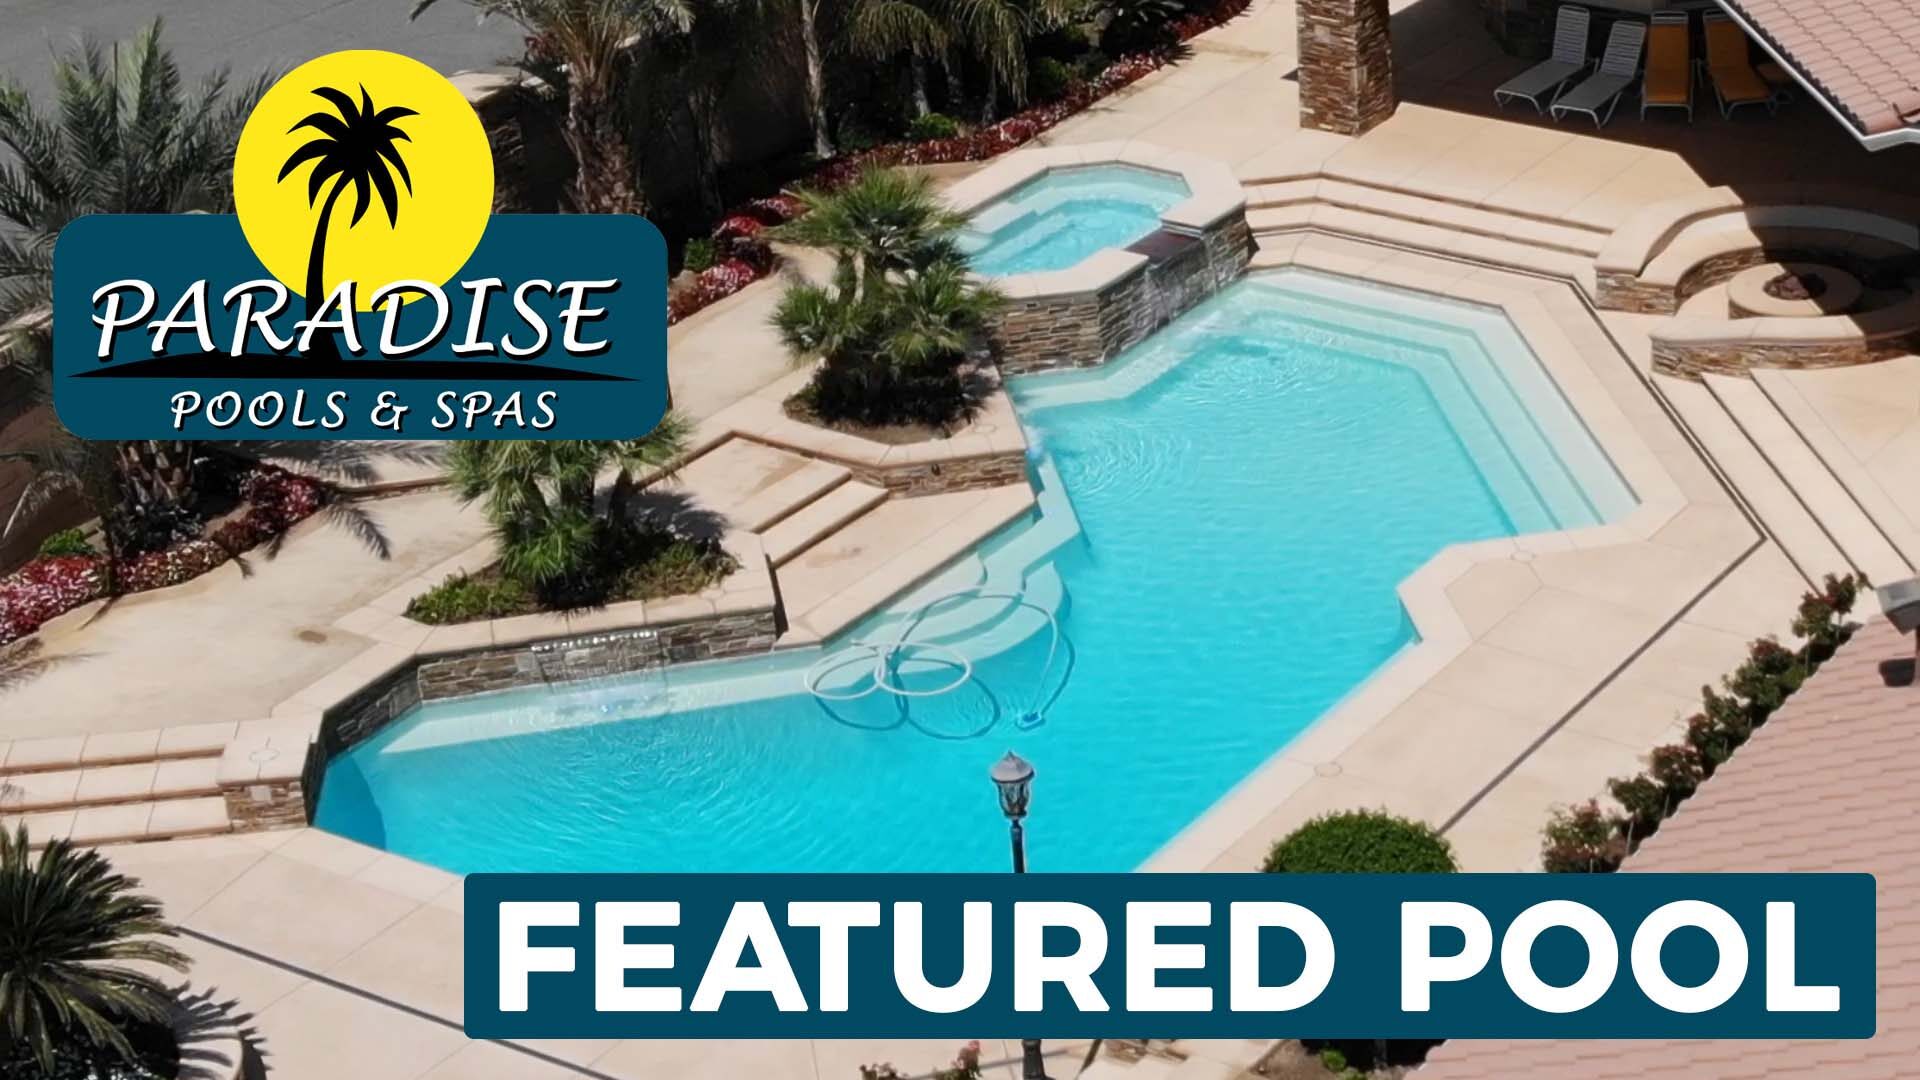 Perfect Private Oasis - Featured Pool aerial shot of Paradise Pools & Spas of Bakersfield..